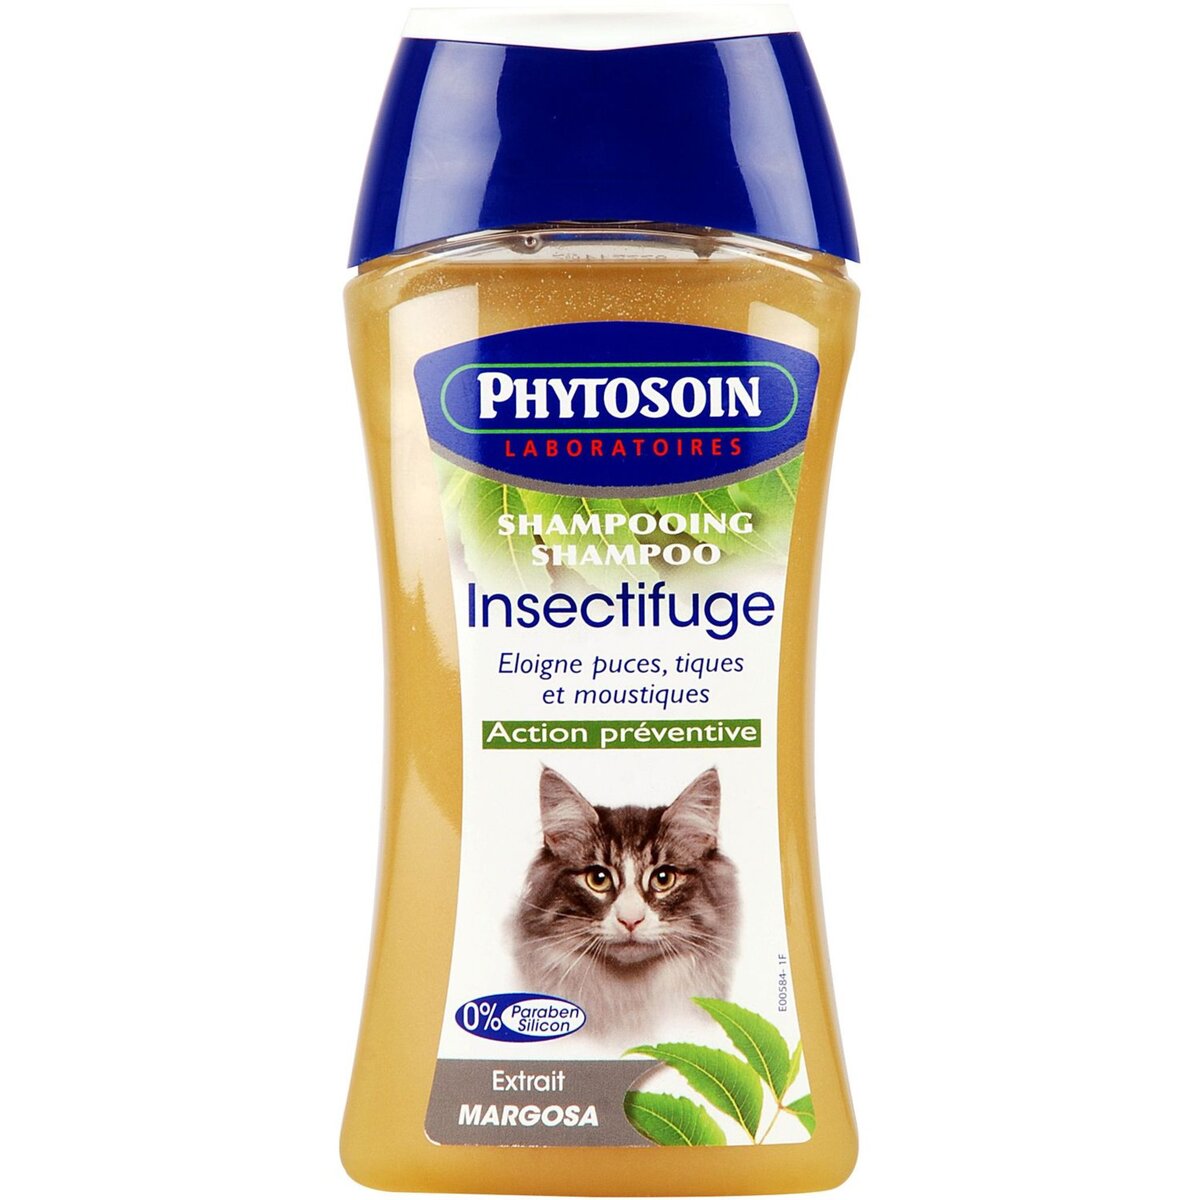 PHYTOSOIN Phytosoin shampooing insectifuge 250ml